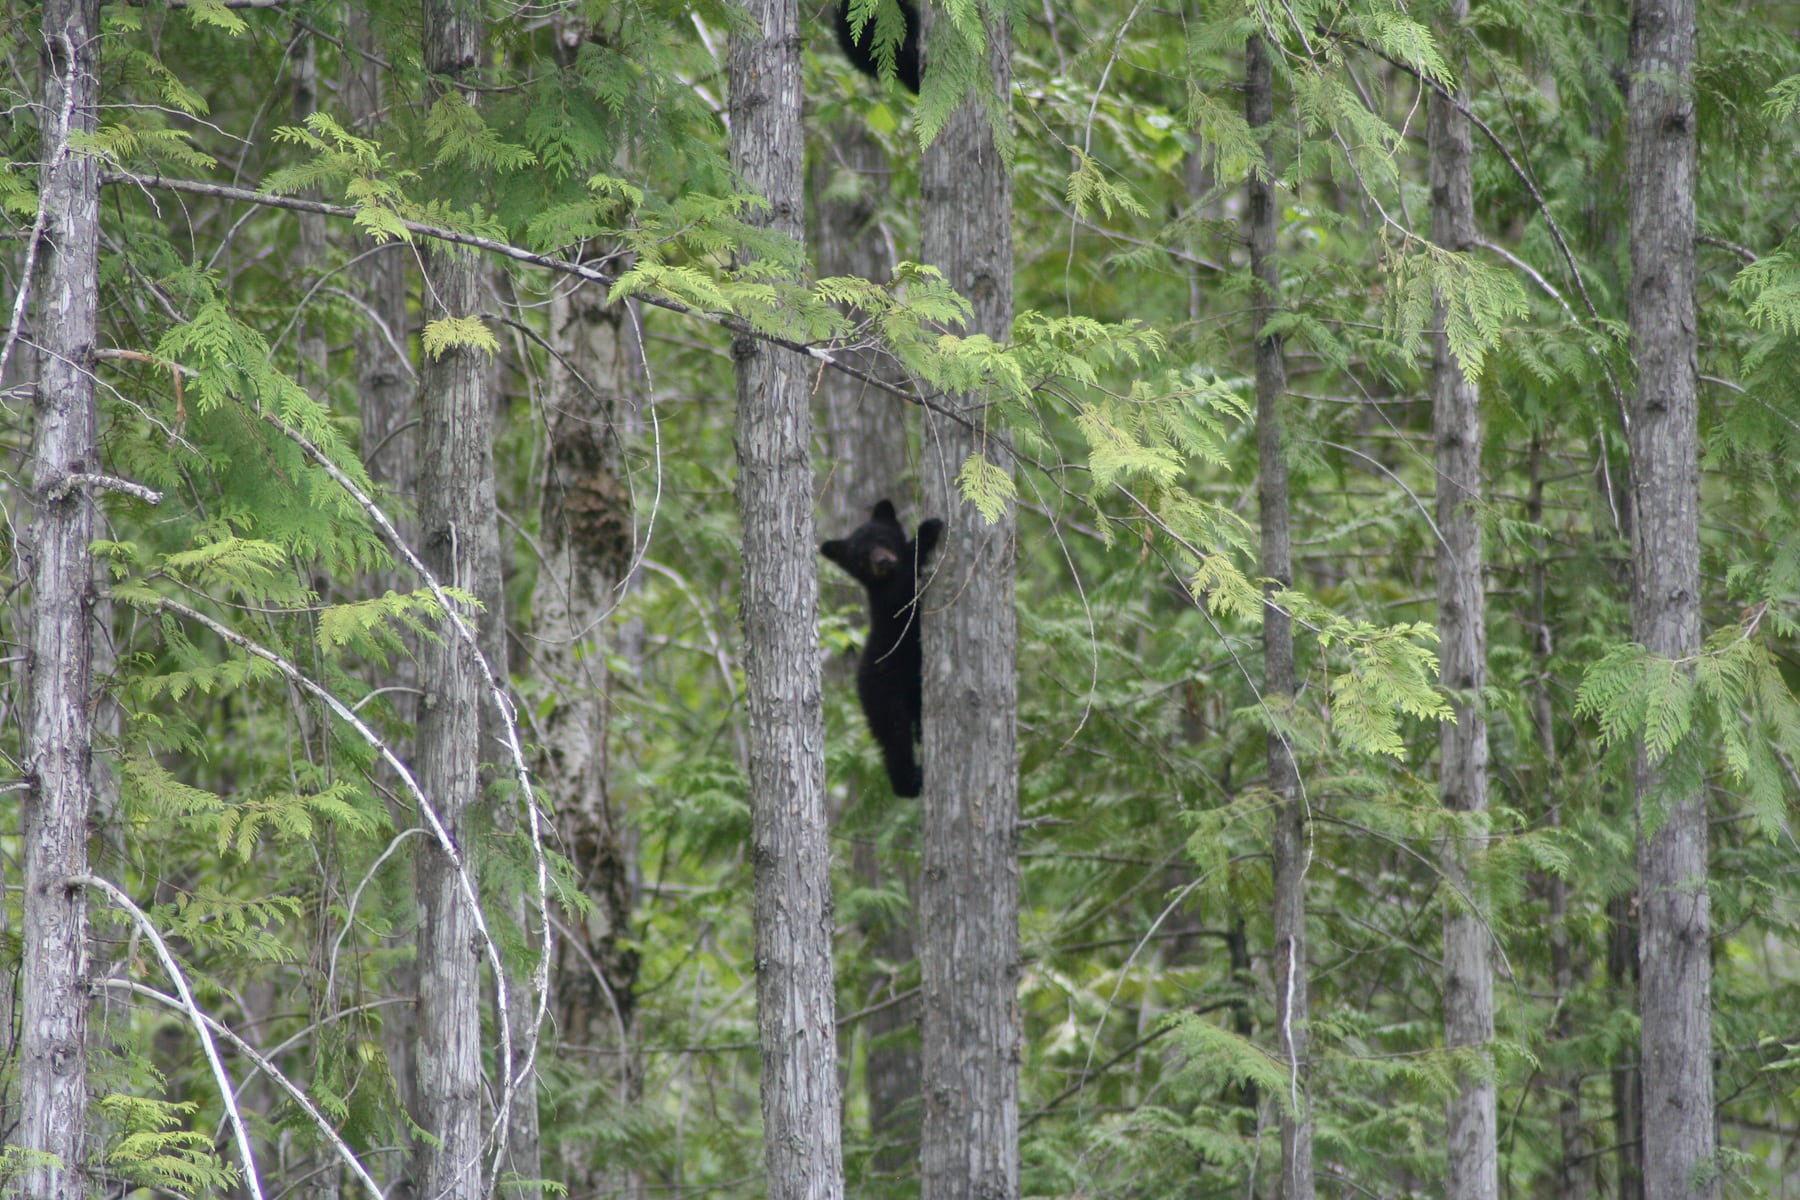 Black bears cubs in a tree at Wild Bear Lodge